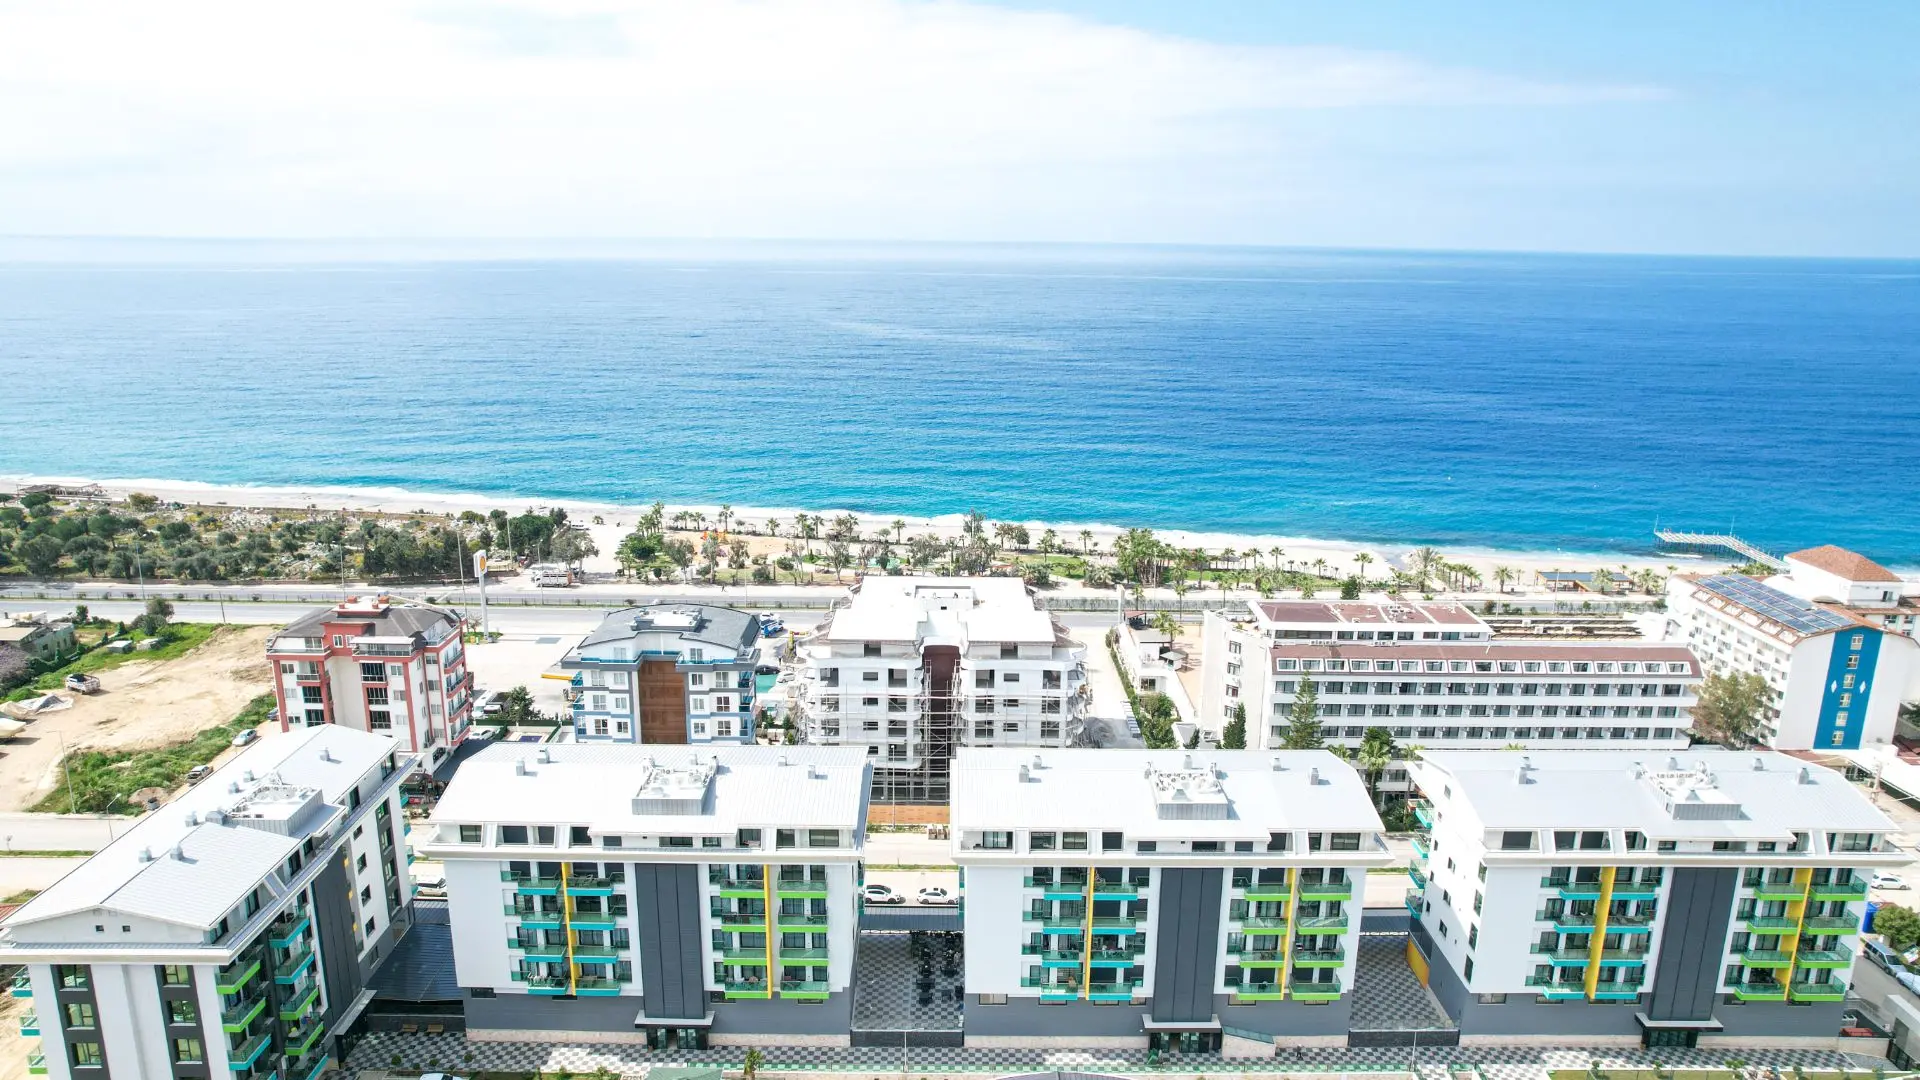 2+1 FLAT IN KARGICAK, ONLY 100 M TO THE SEA - FULL ACTIVITY